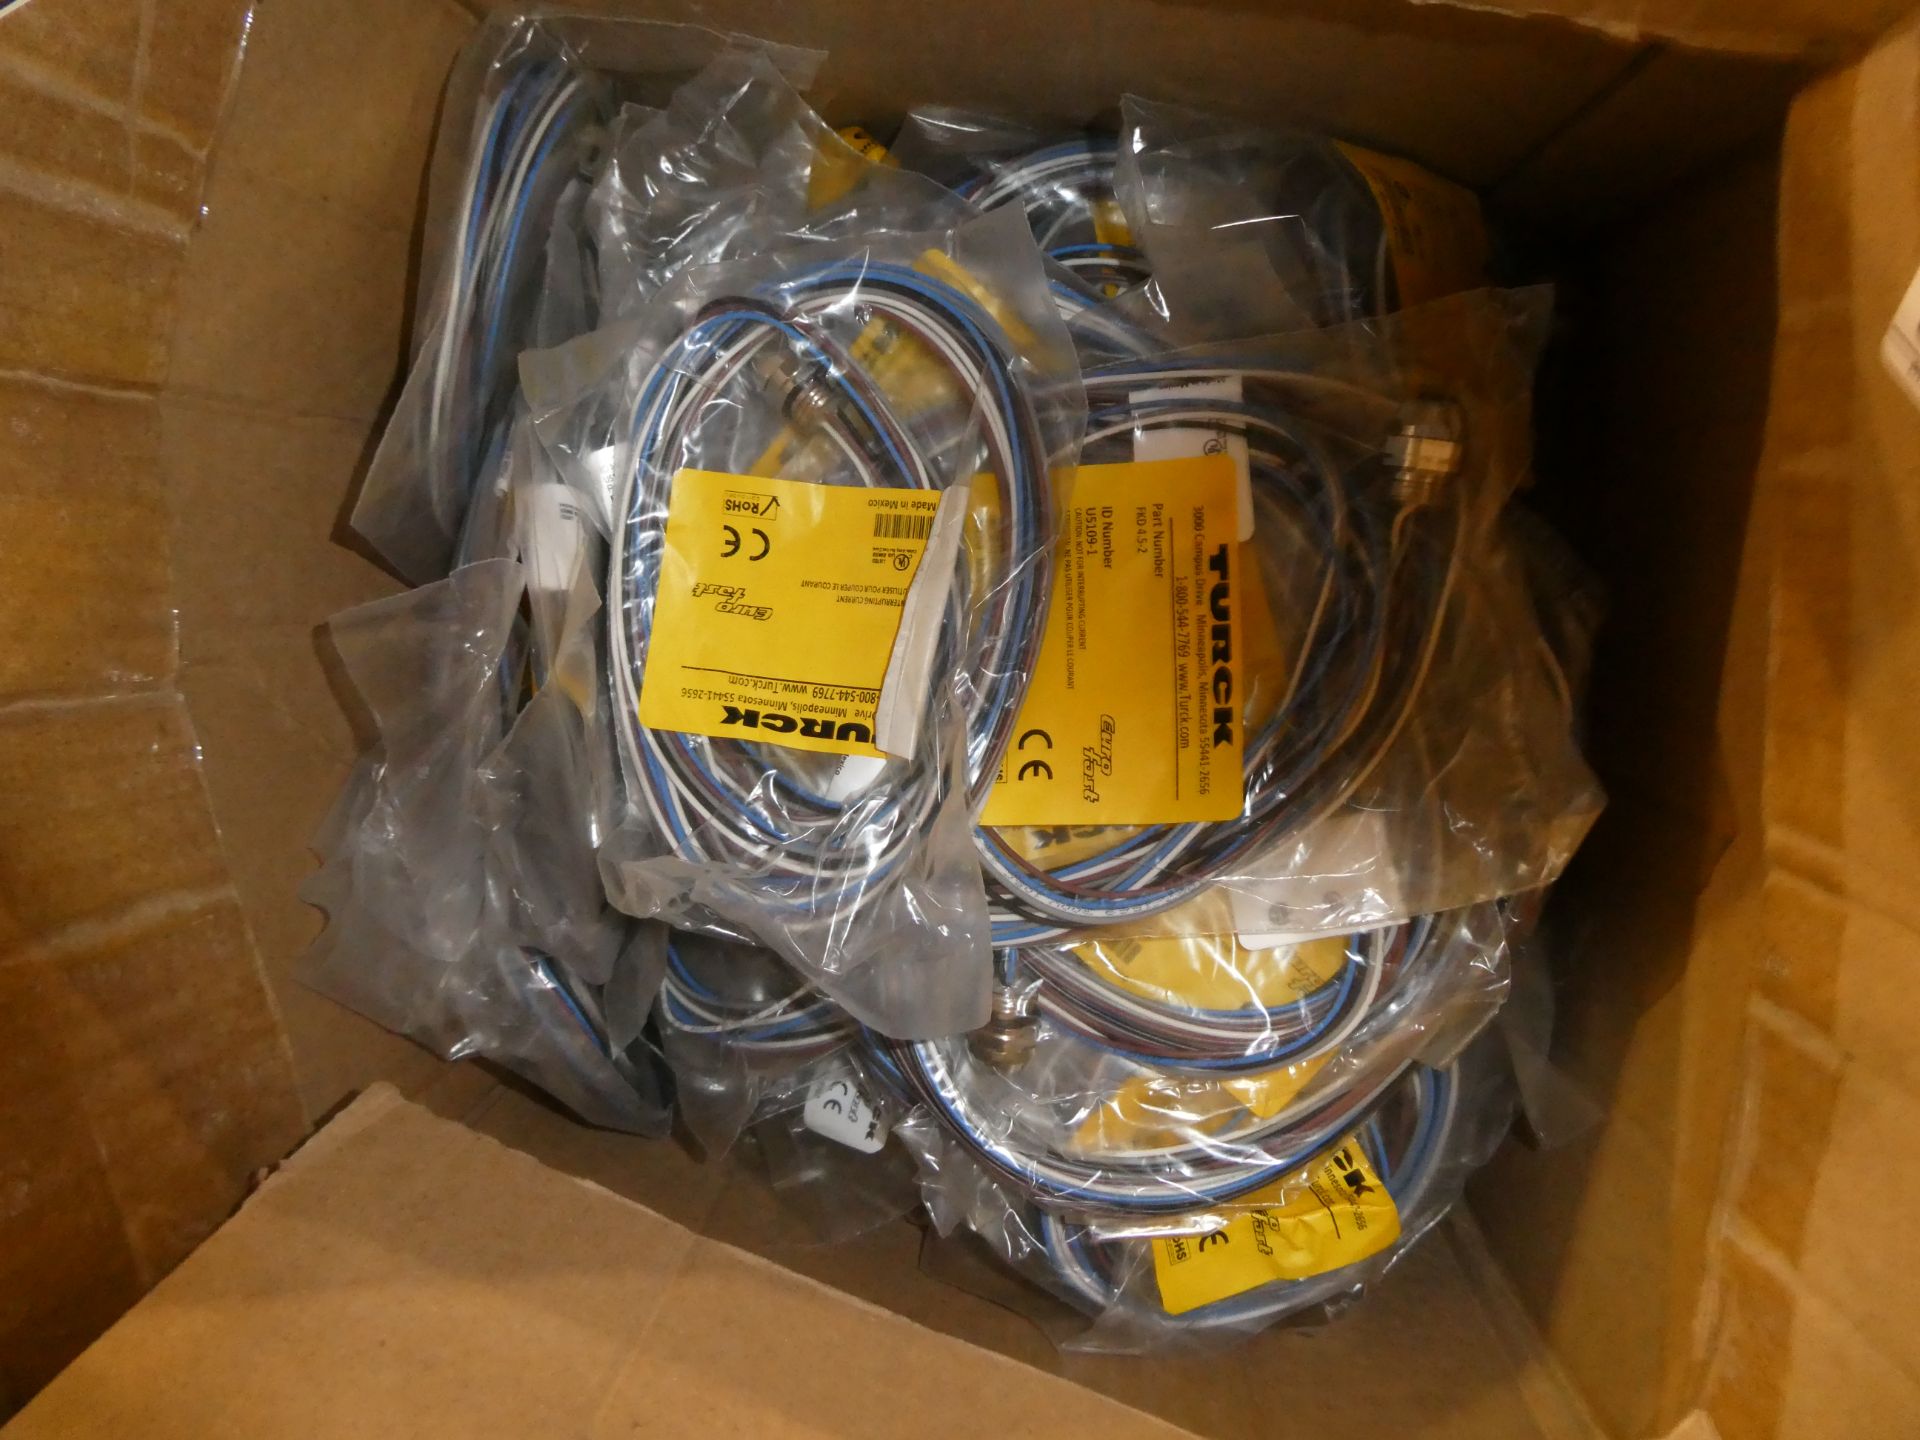 Belden 1000ft Cable Spool 18AWG, Panduit Cat 6 Patch Cord - Image 7 of 7